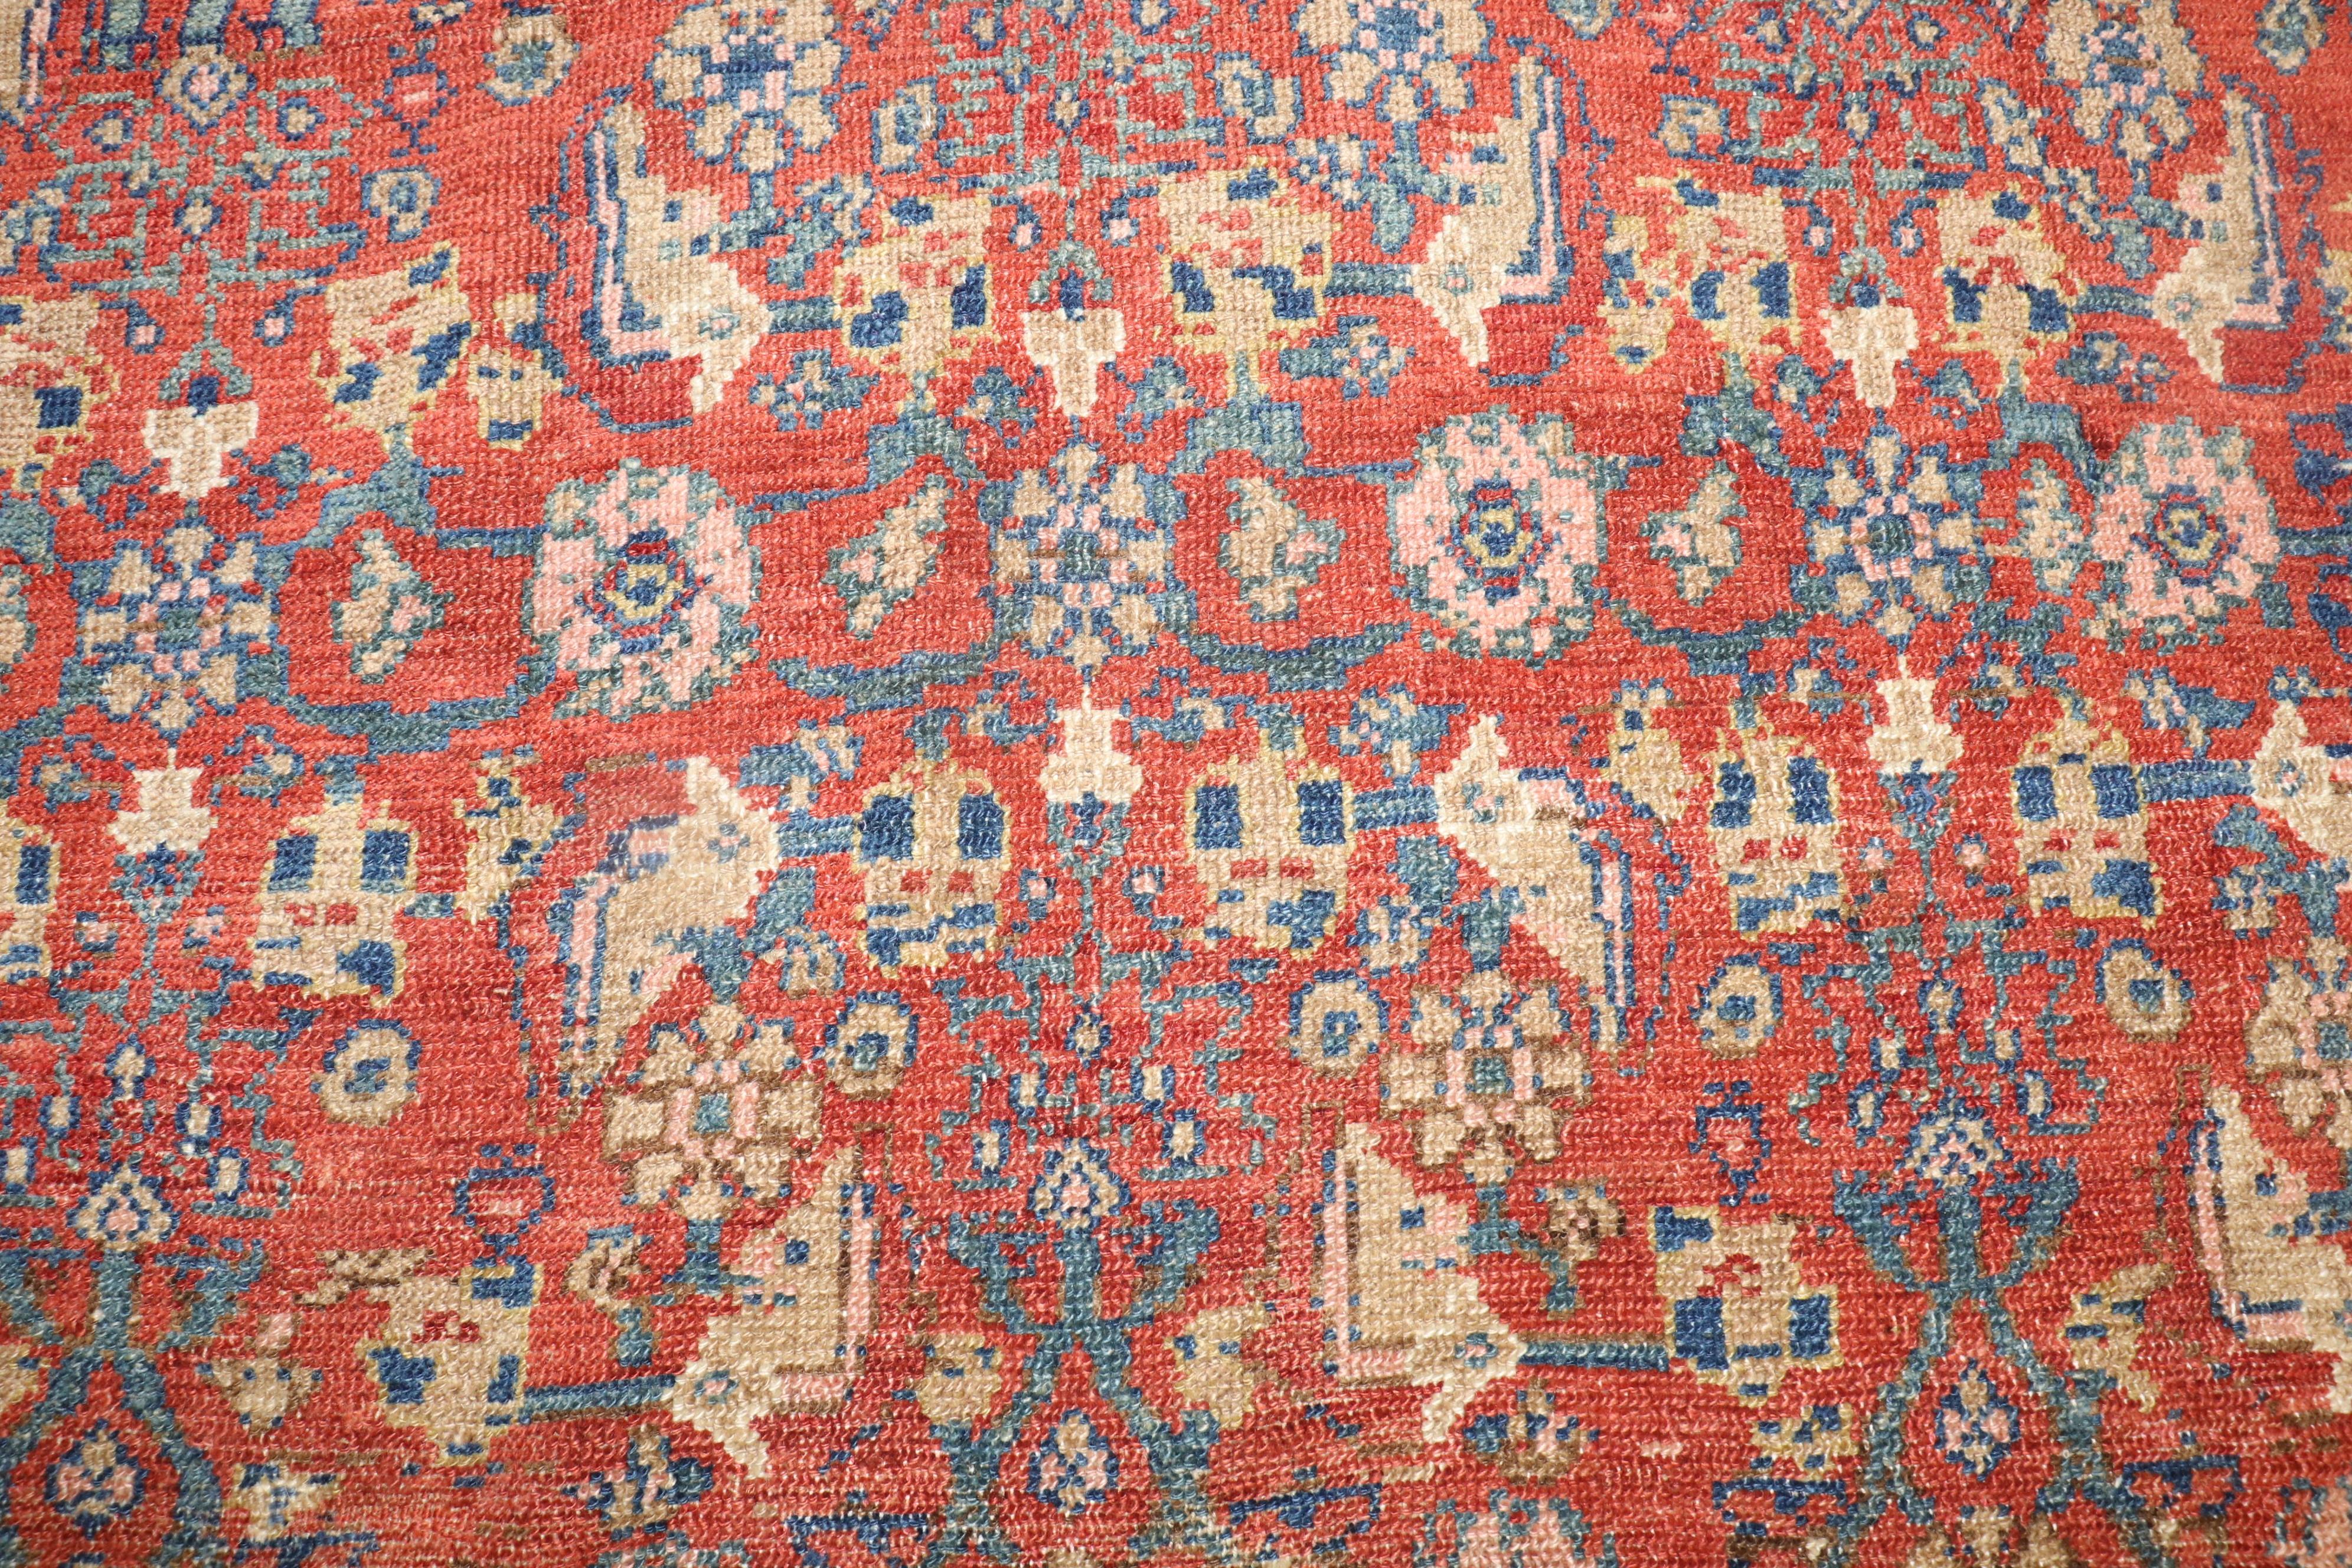 A fine antique Persian Senneh interemediate size rug from the 2nd quarter of the 20th century

Measure: 4'7'' x 6'6'' circa 1930

Antique Senneh rugs are one of the most distinctive of all Persian rugs, even though the designs are often similar